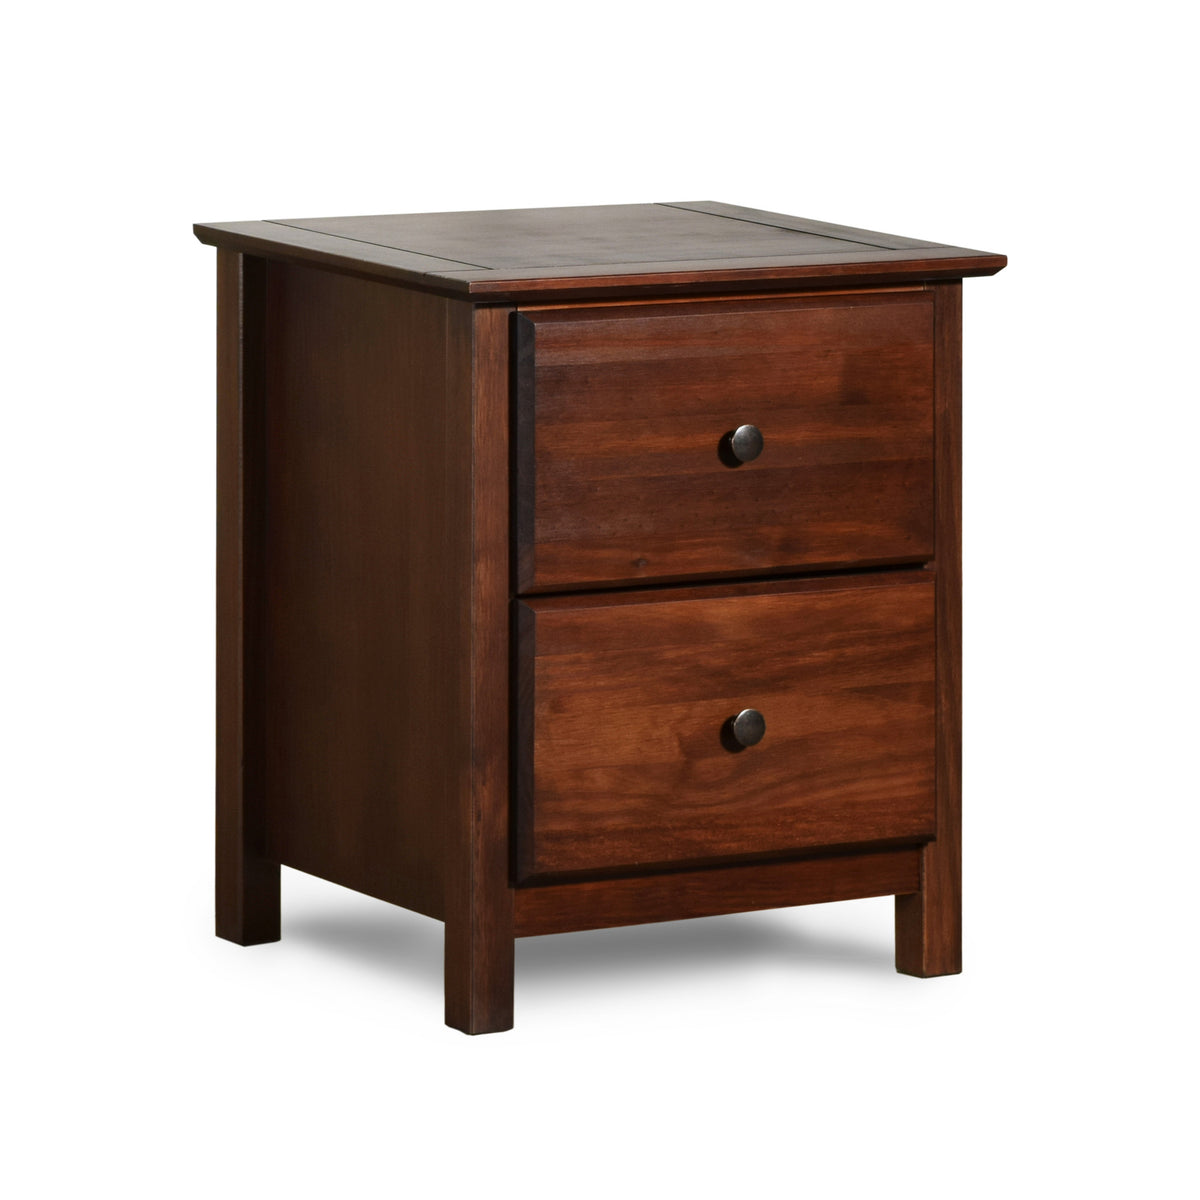 Details about   Grain Wood Furniture Shaker 2-drawer Solid Wood Nightstand 